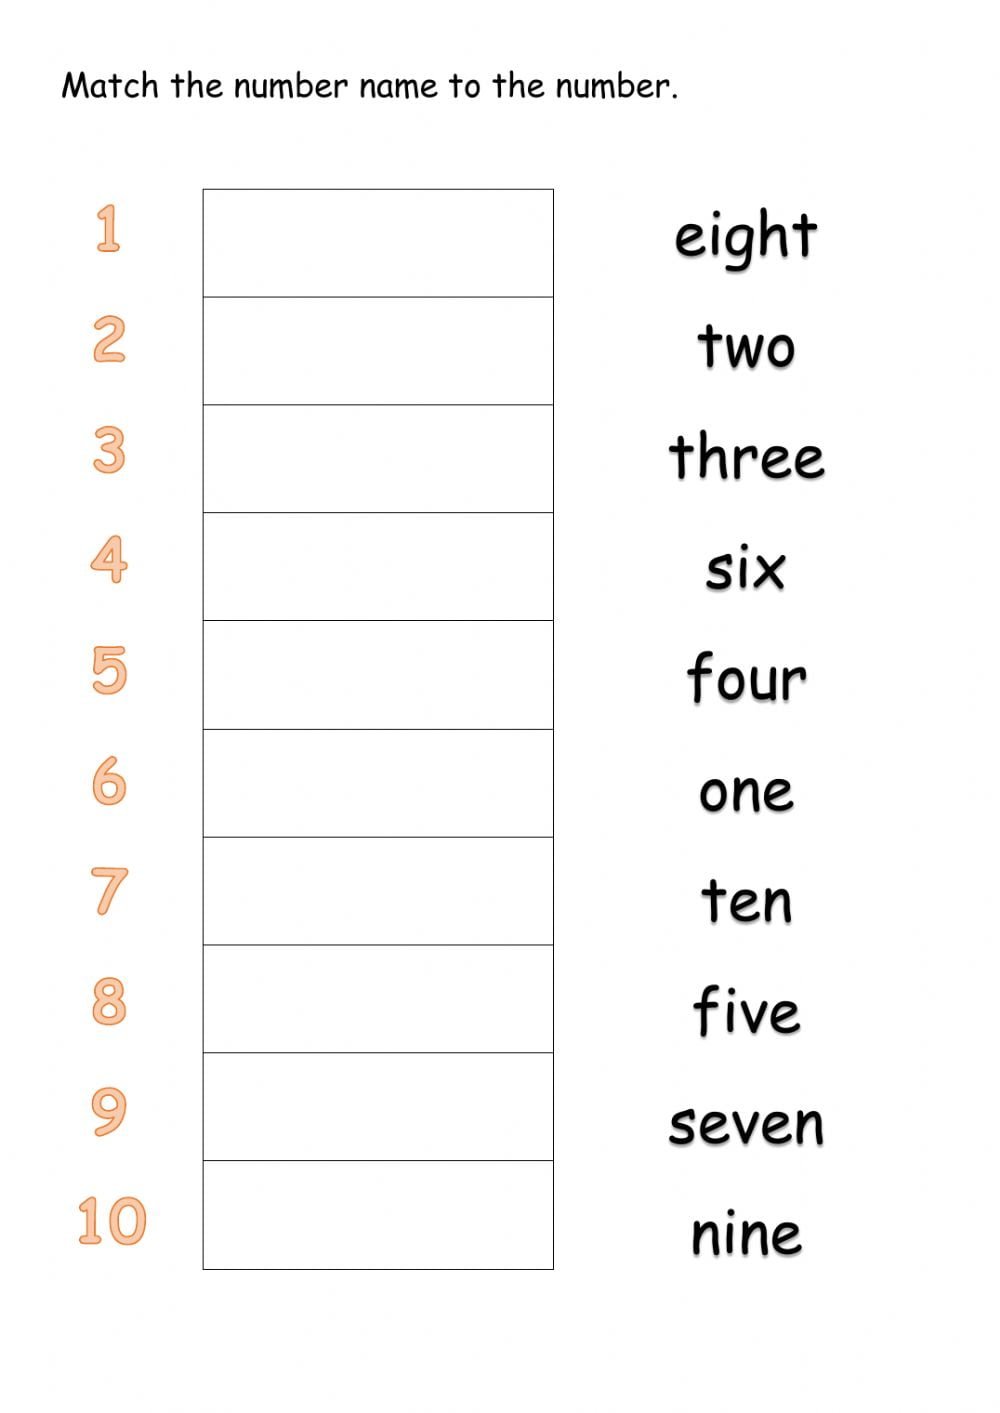 Matching Number Name To Numbers (1-10) Worksheet